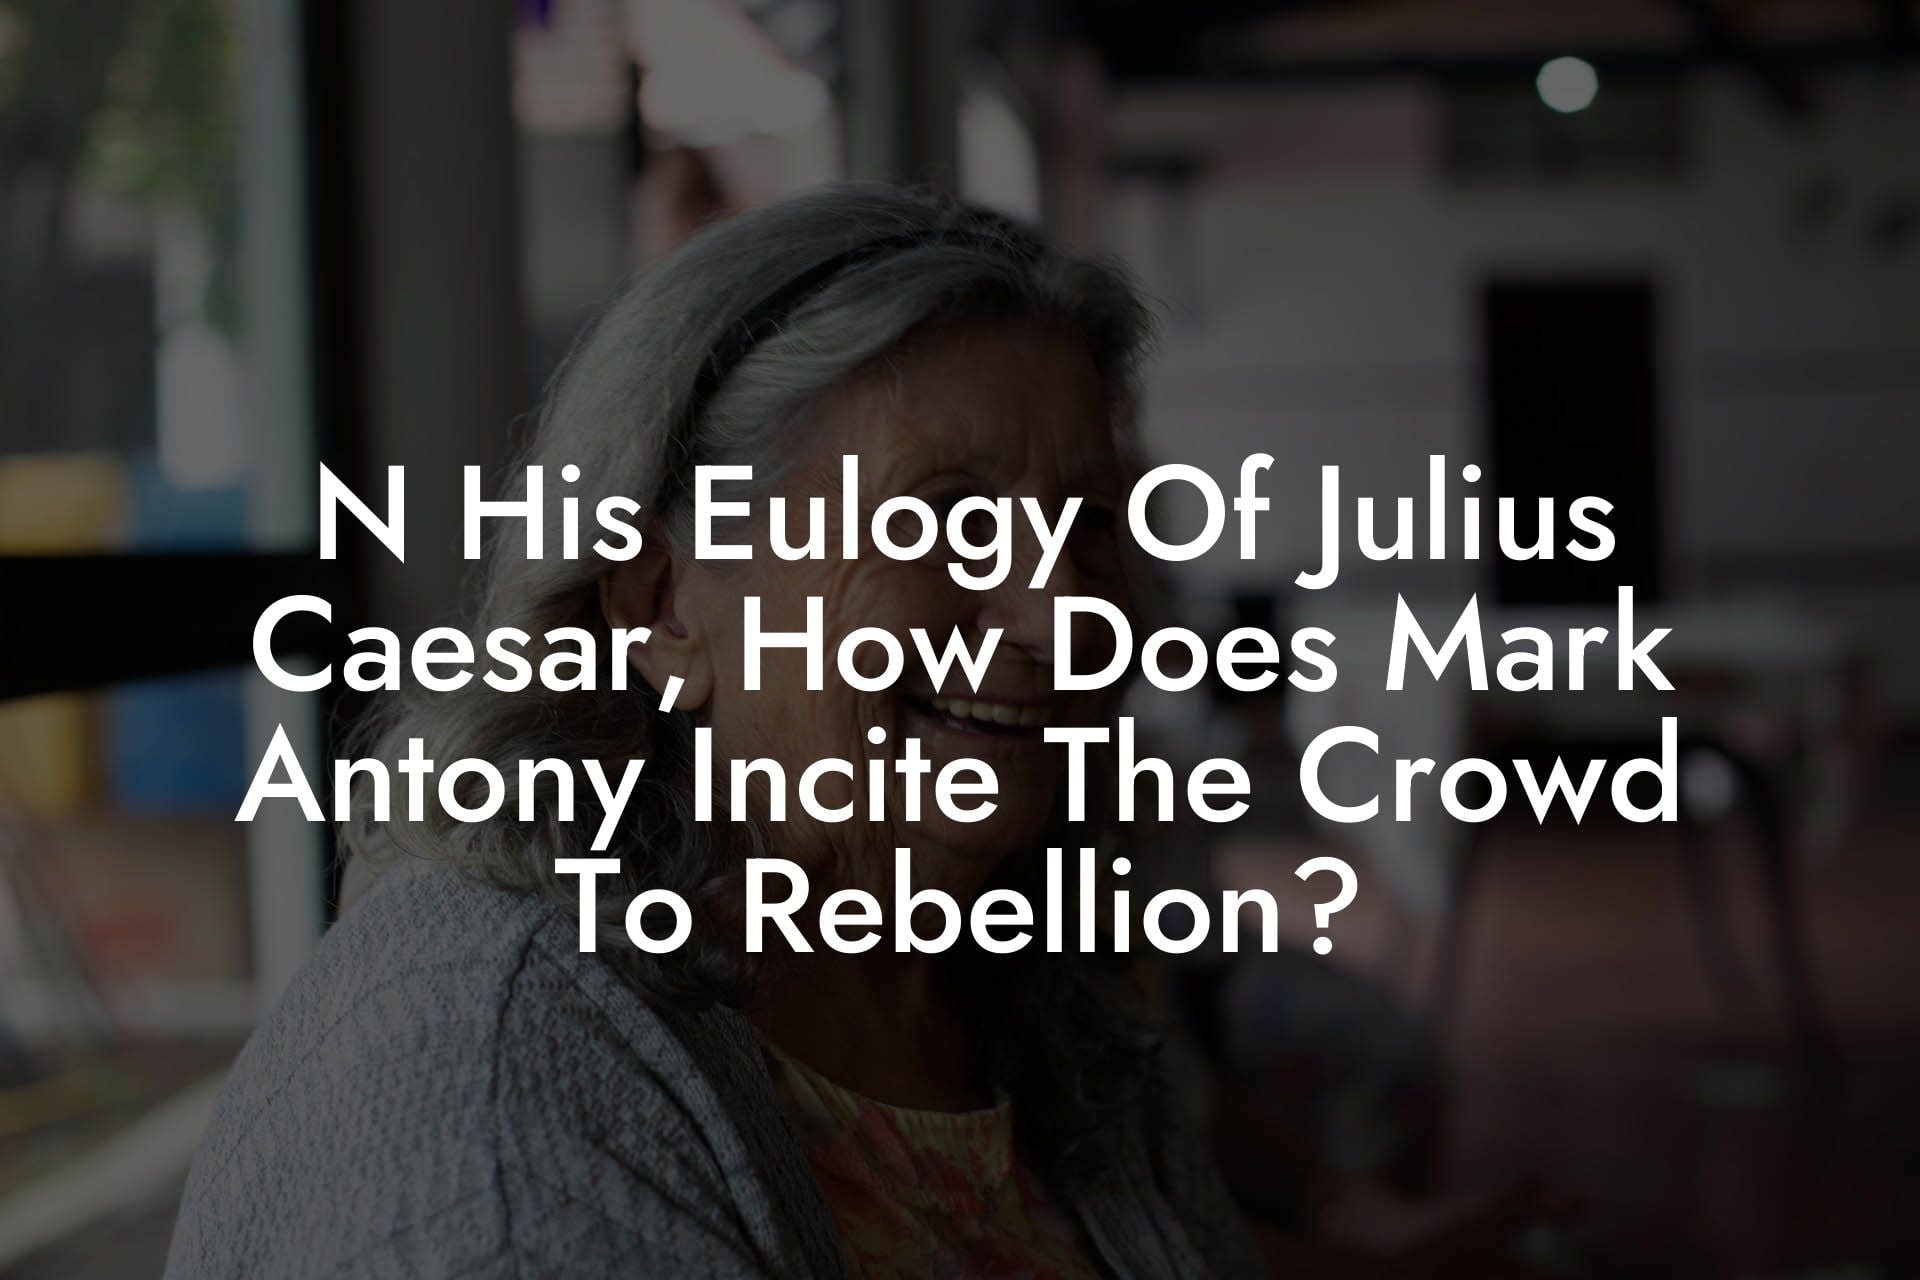 N His Eulogy Of Julius Caesar, How Does Mark Antony Incite The Crowd To Rebellion?